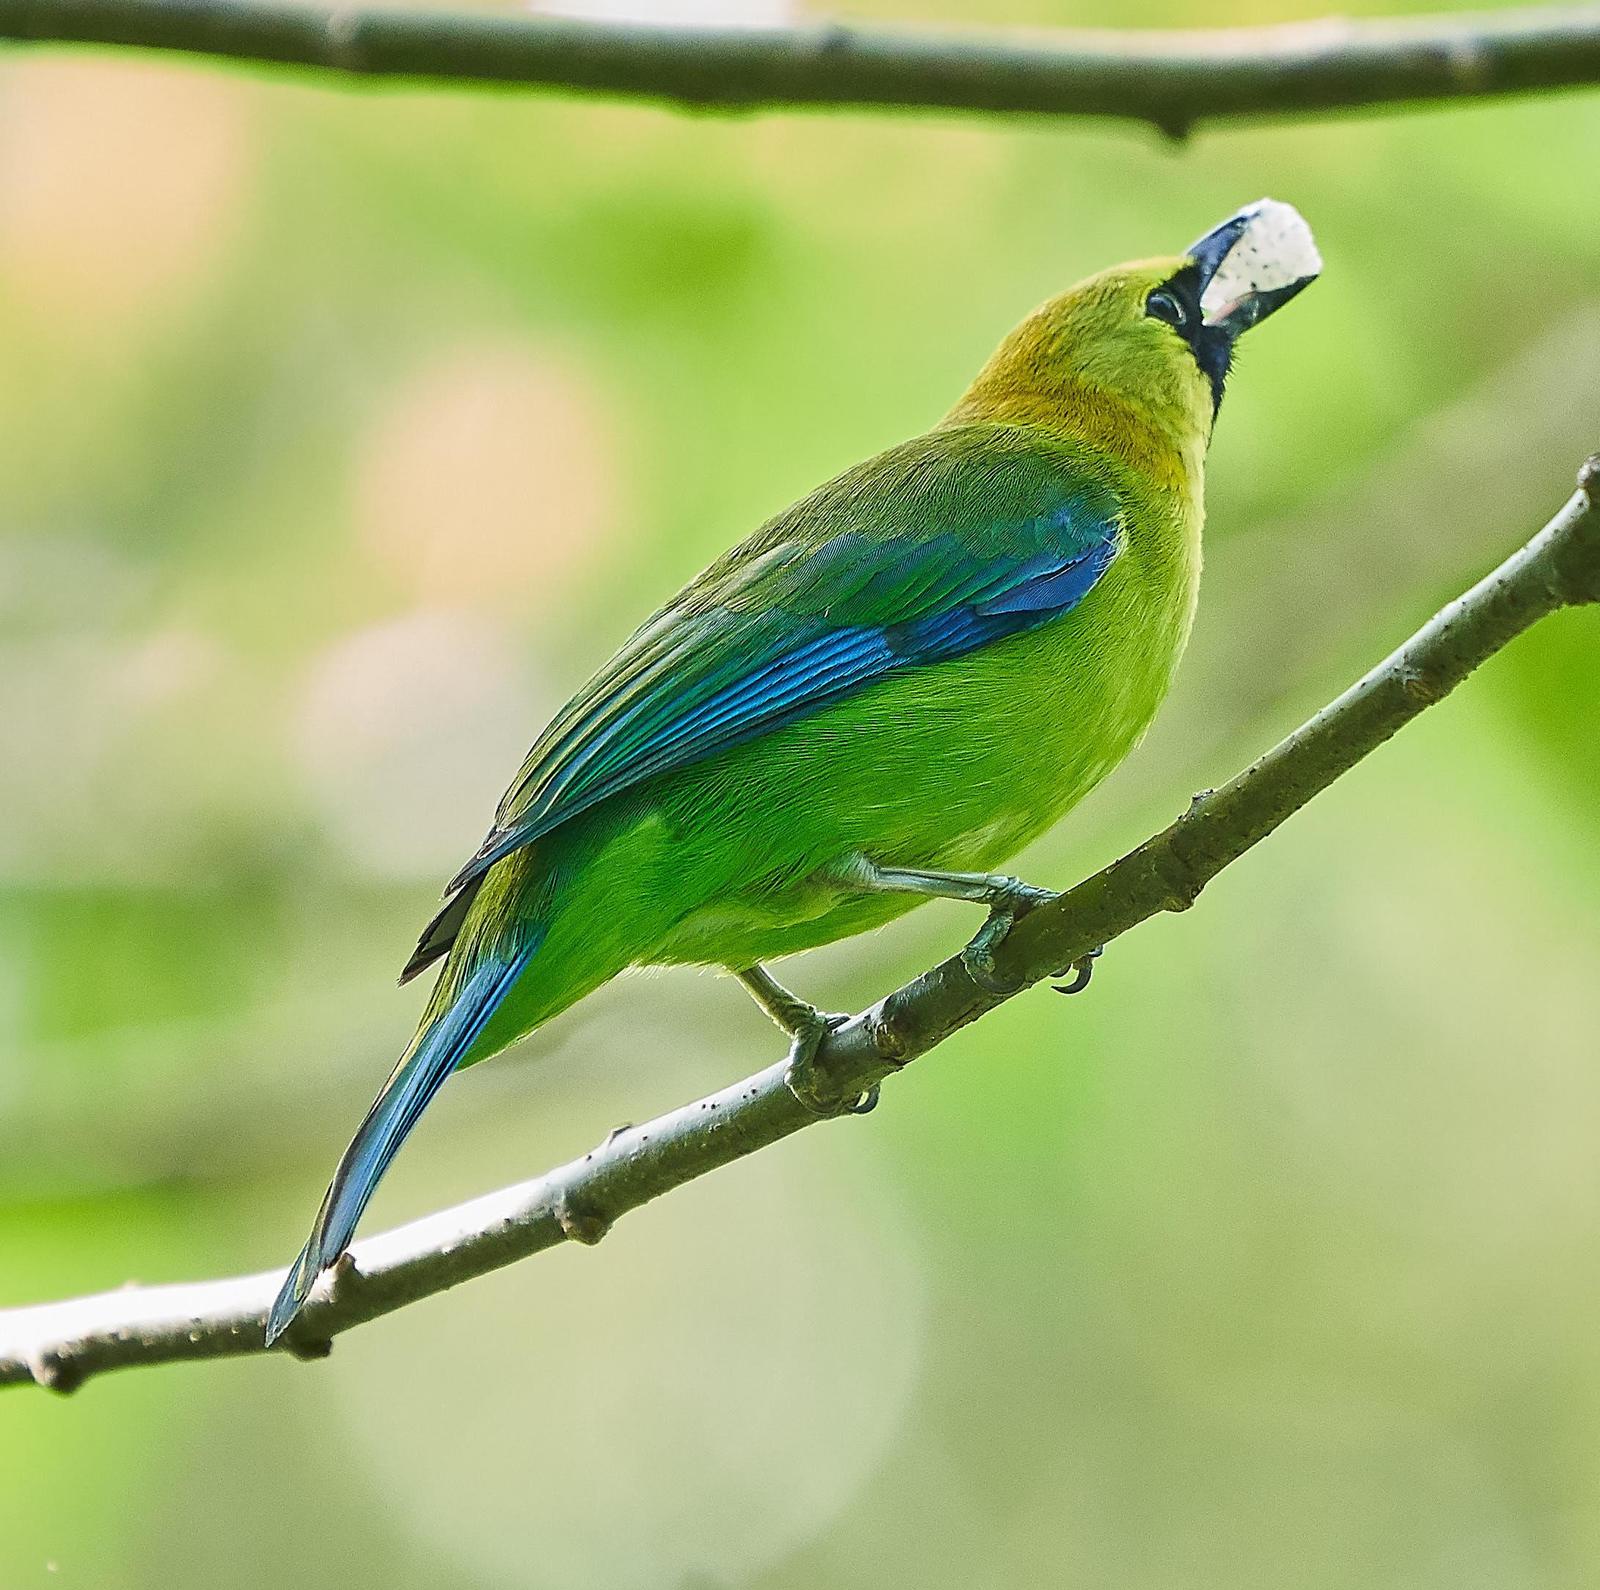 Blue-winged Leafbird Photo by Steven Cheong